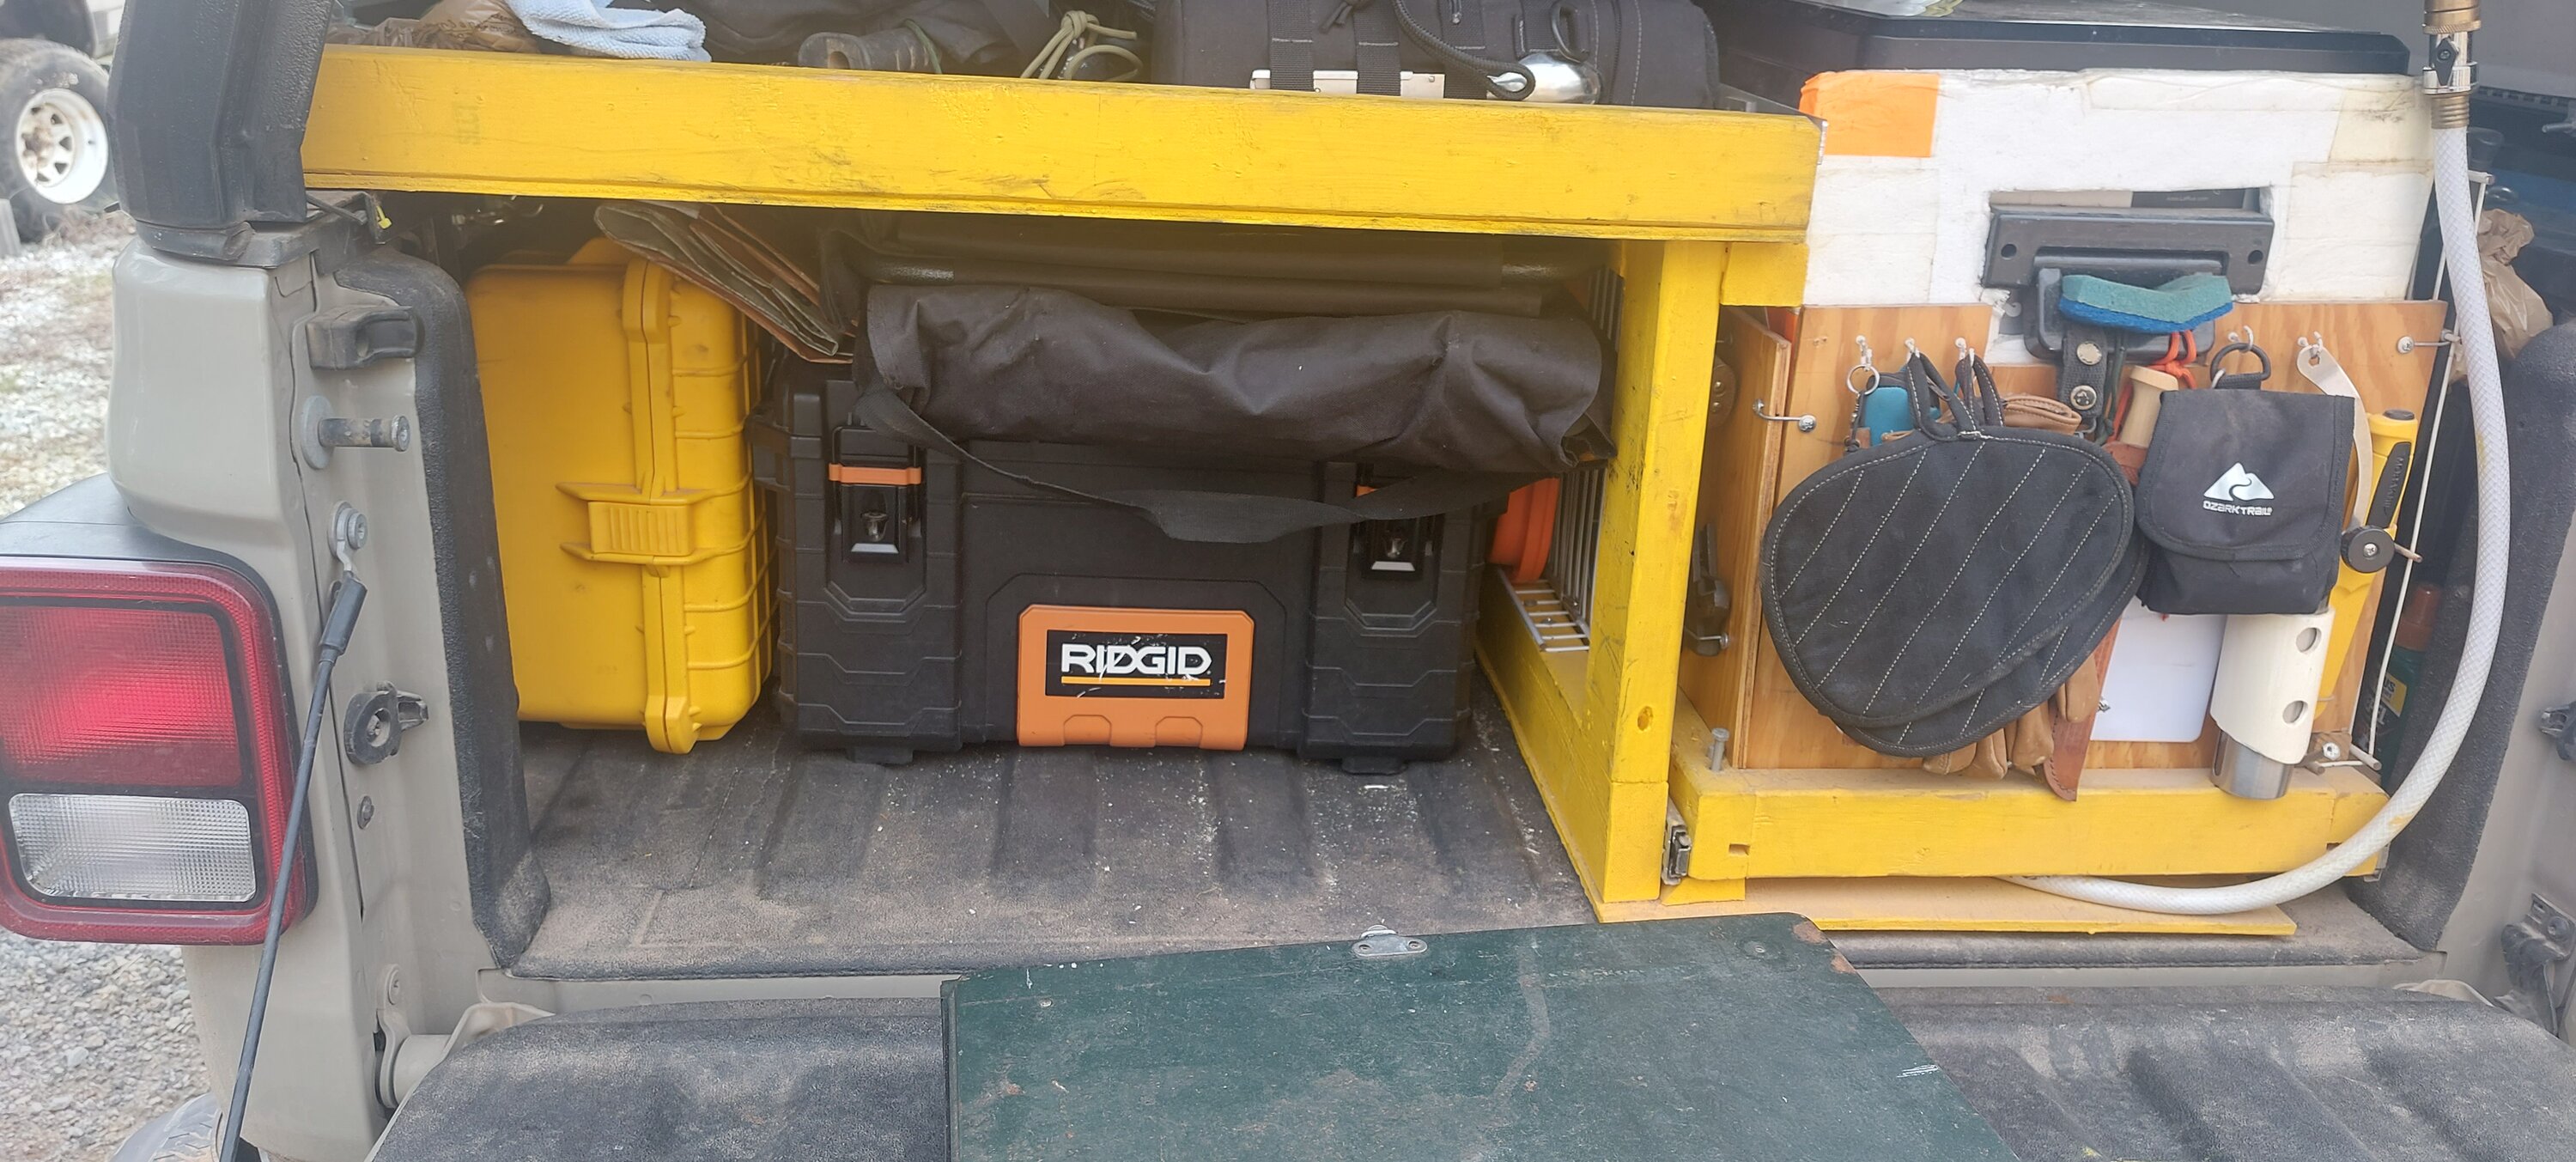 RIDGID PRO GEAR SYSTEM Gen 2.0 (storage) currently on sale at Home Depot